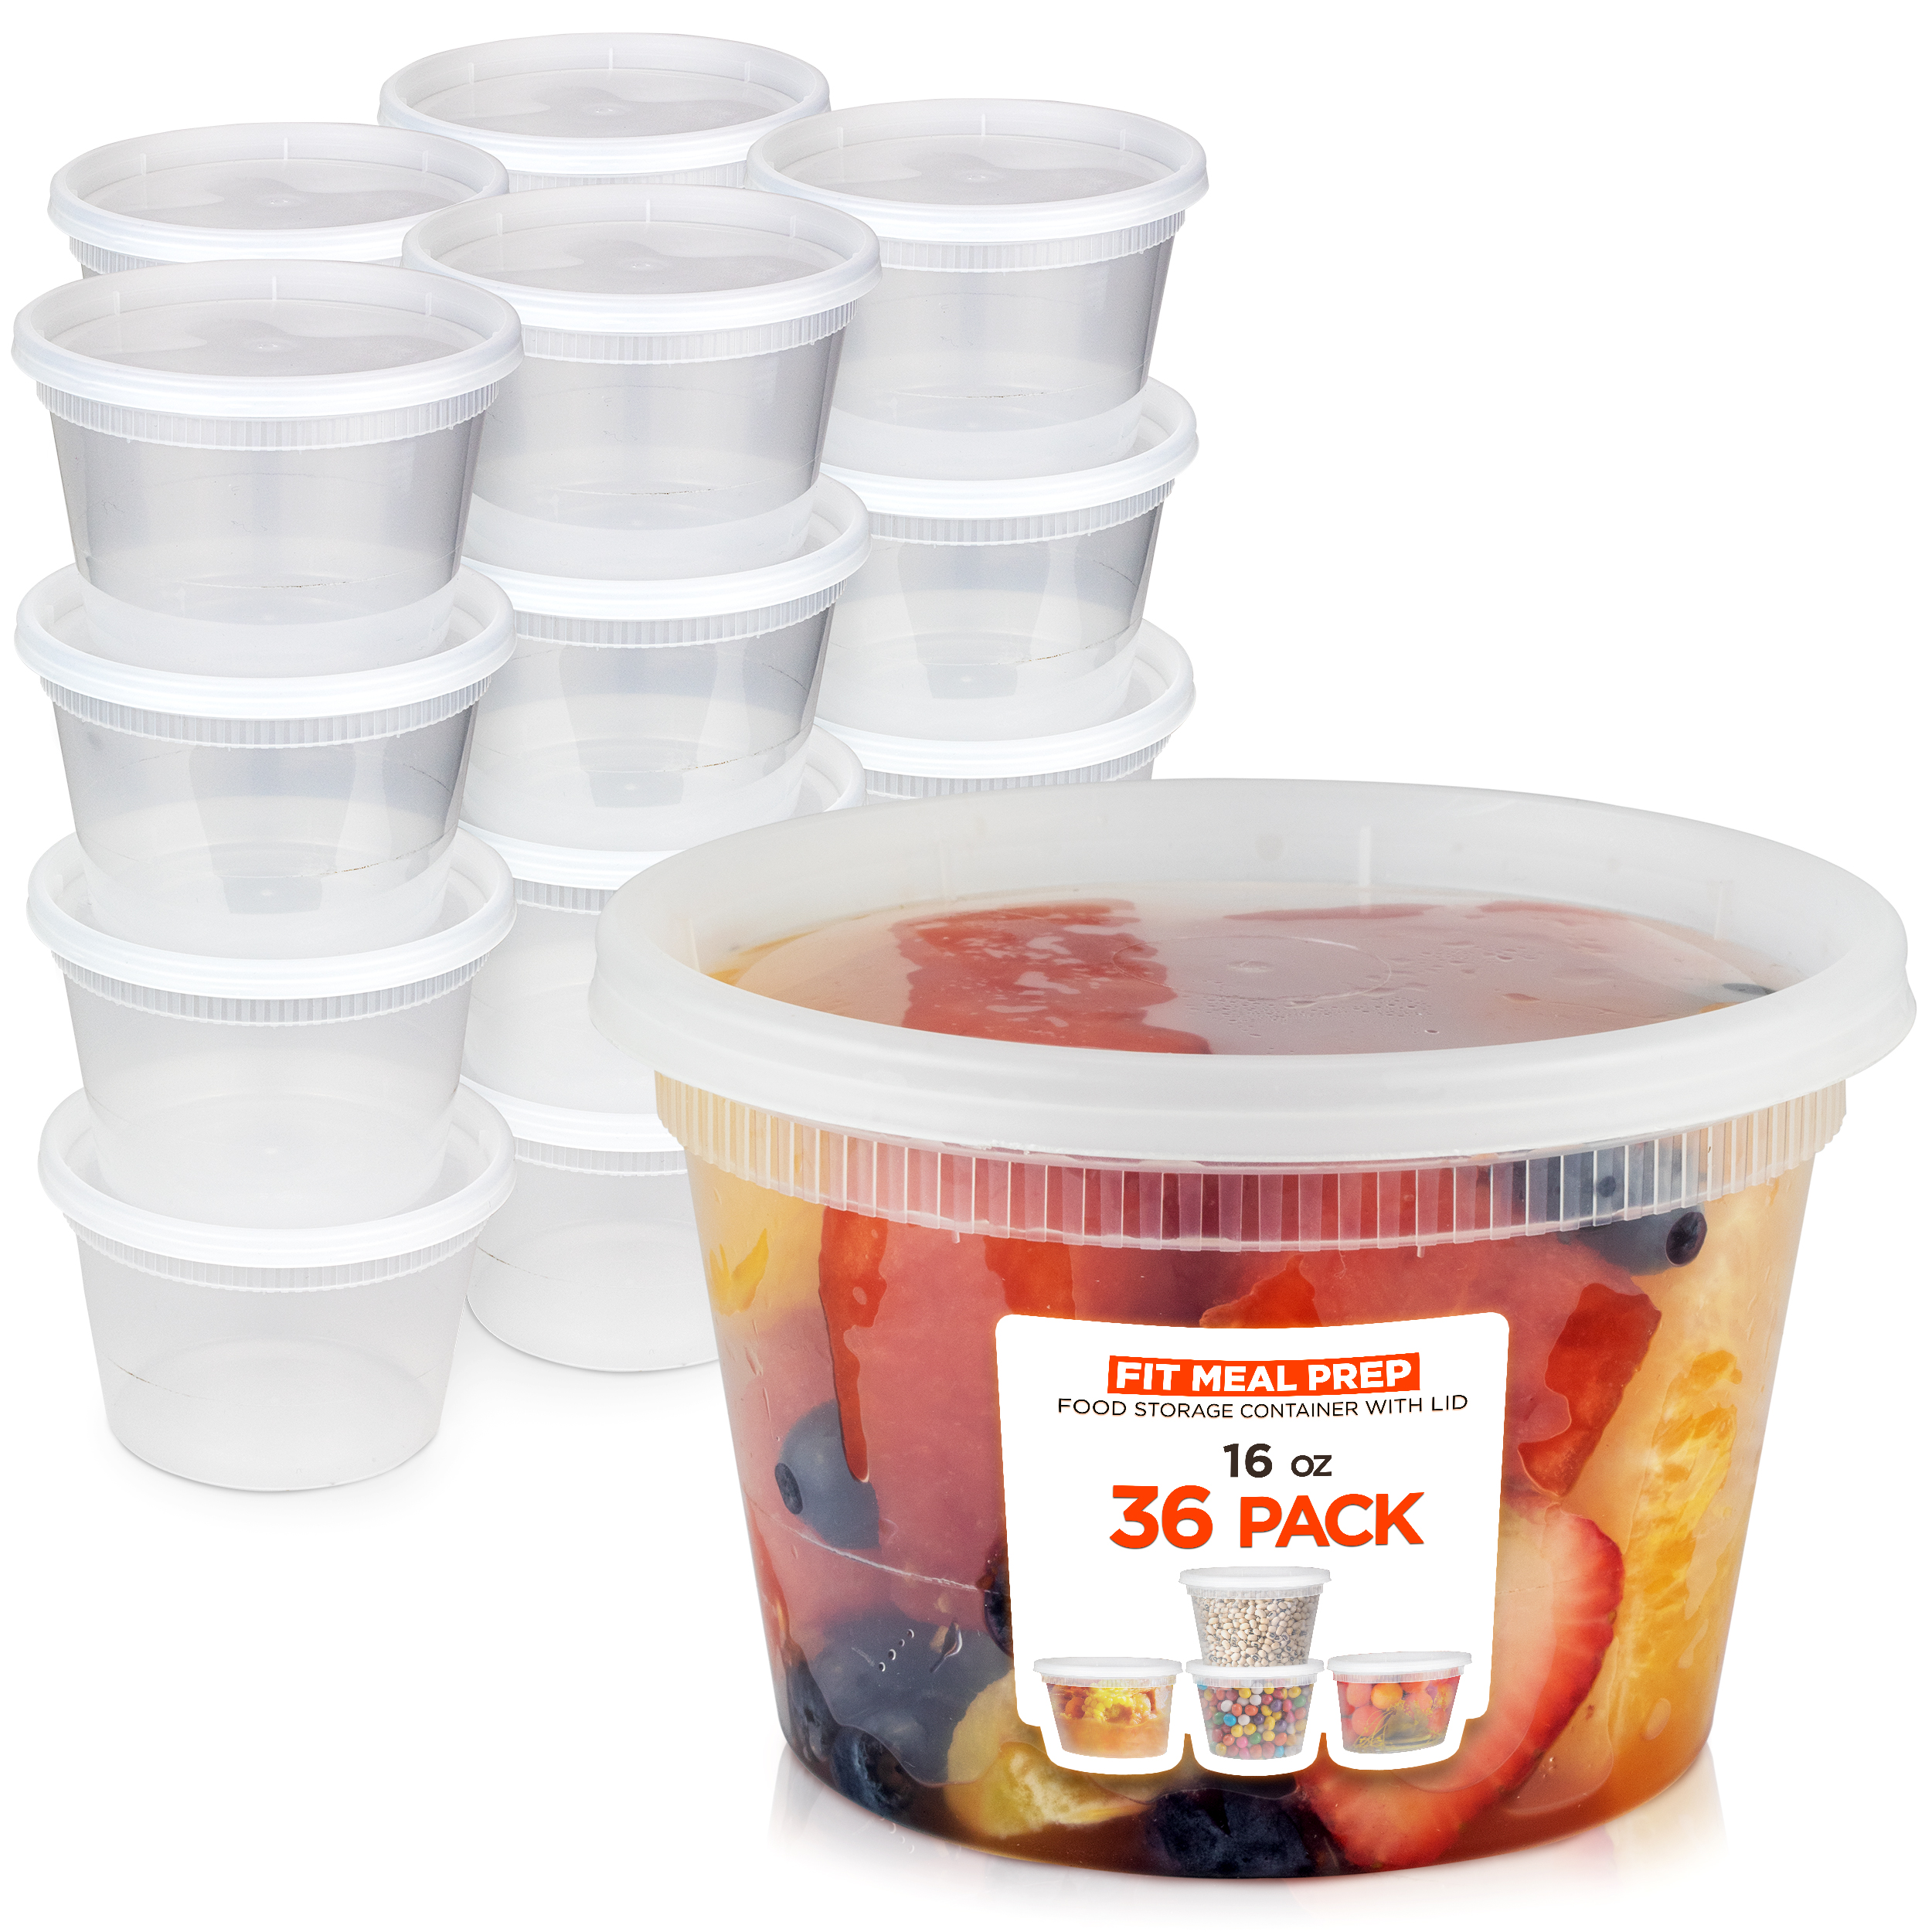 [36 Pack] Food Storage Containers with Lids, Round Plastic Deli Cups, US Made, 16 oz, Pint Size, Leak Proof, Airtight, Microwave & Dishwasher Safe, Stackable, Reusable, White - image 1 of 7